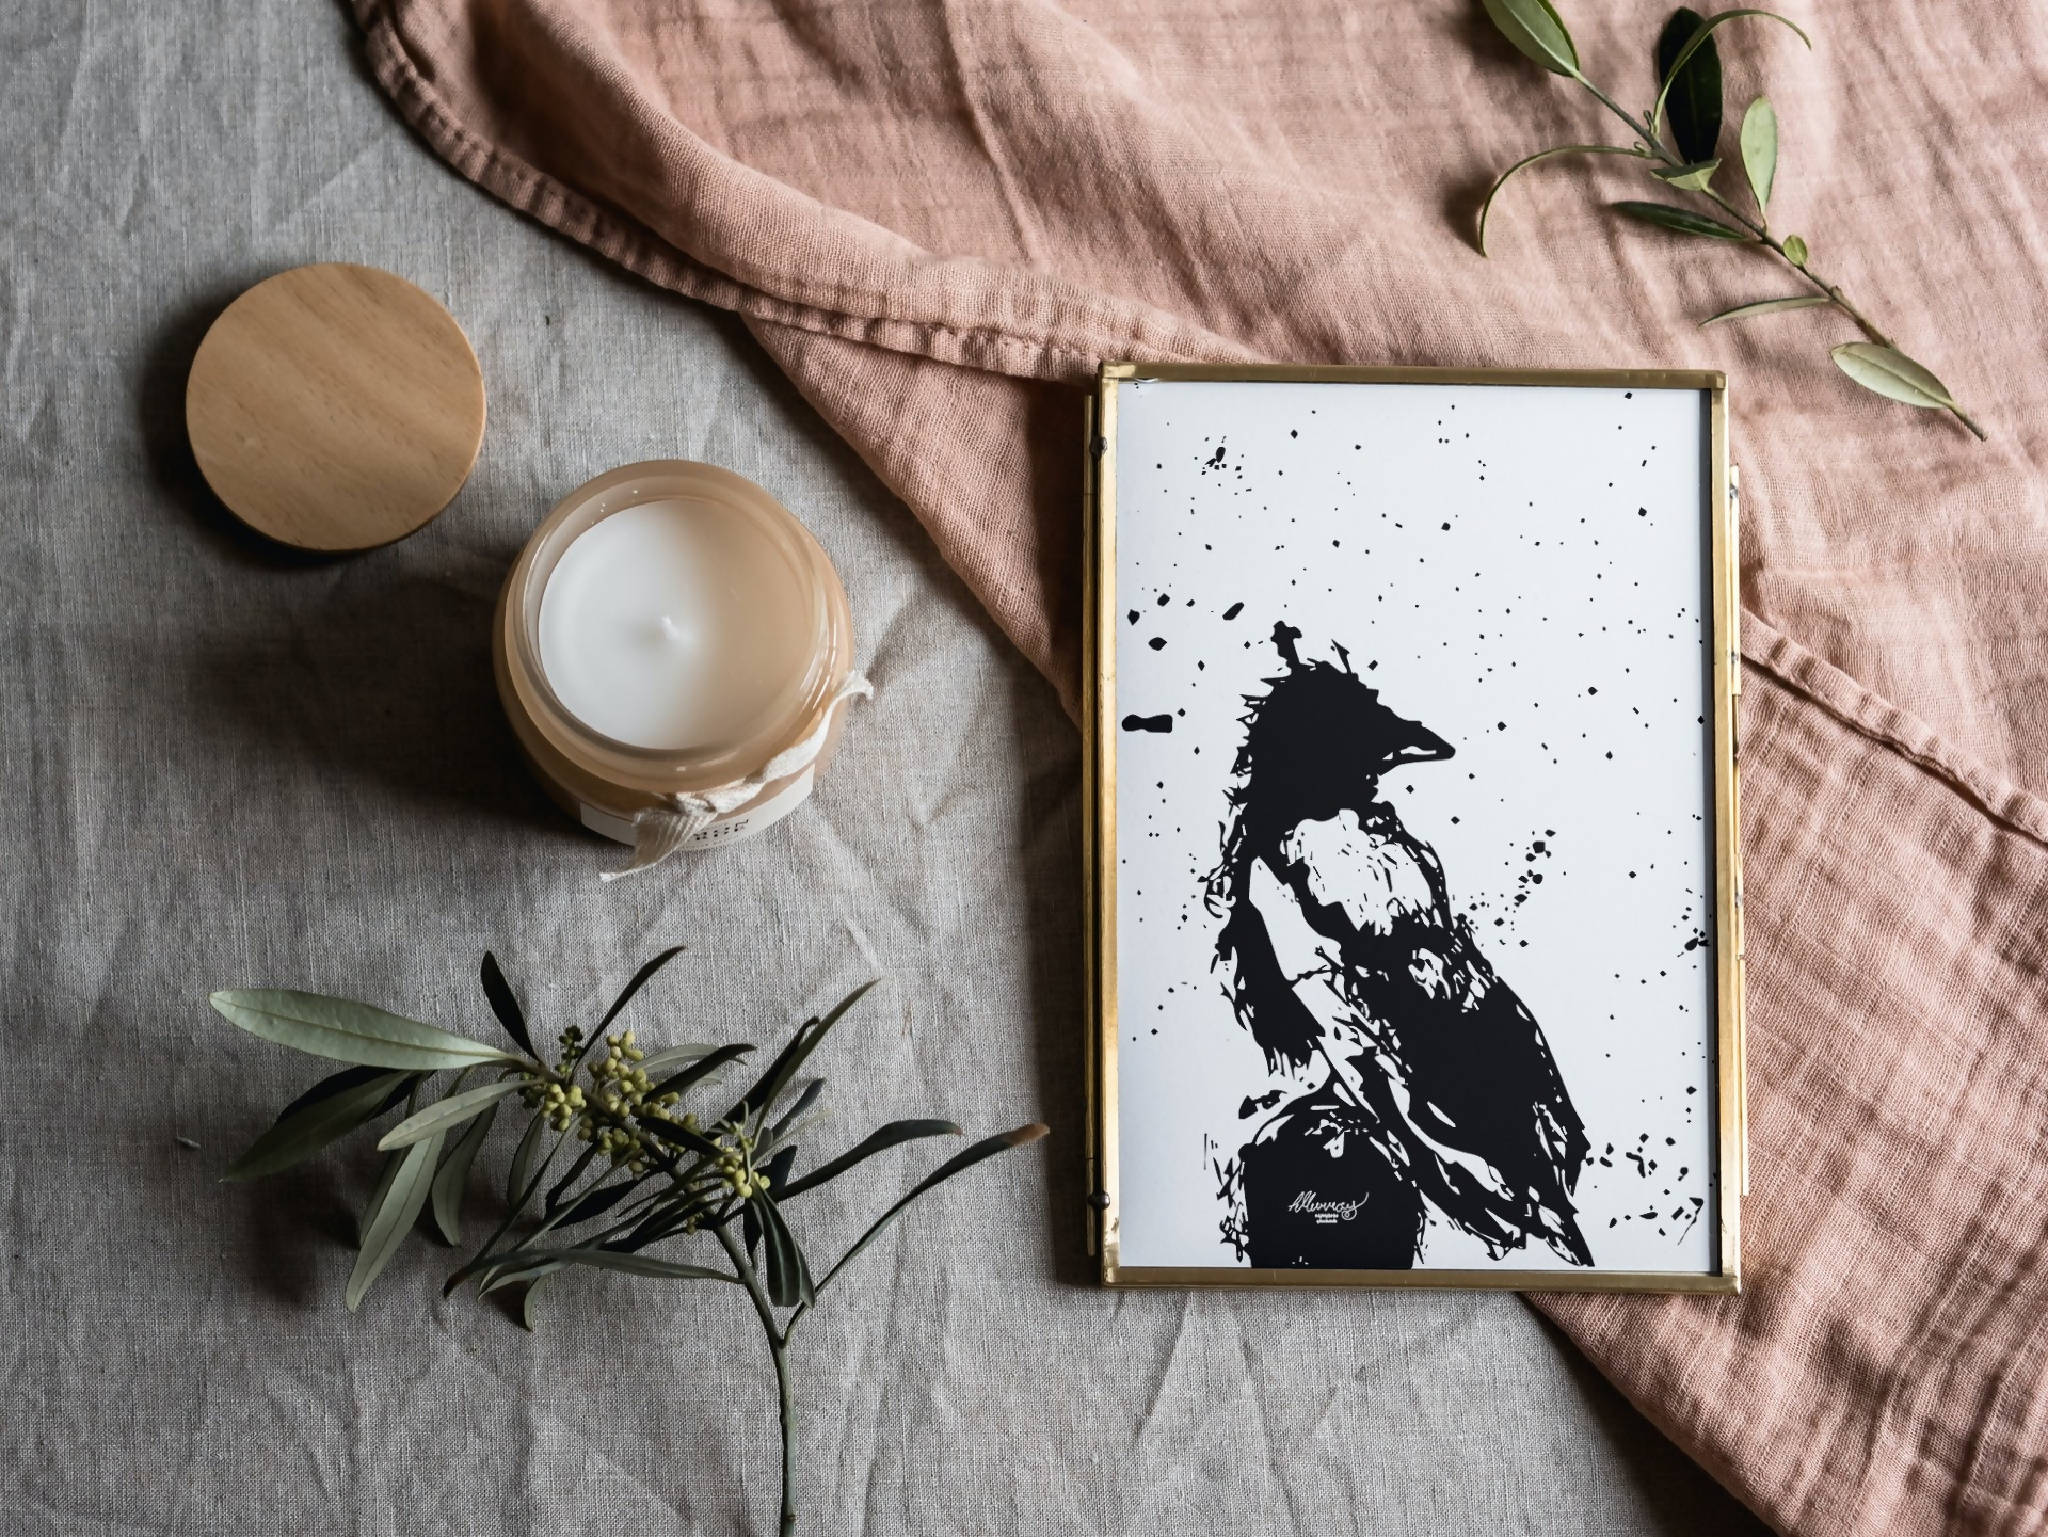 Perched Crow Print | Halloween Decoration | Pen and Ink Digital Art Print | Christmas Gift Ideas